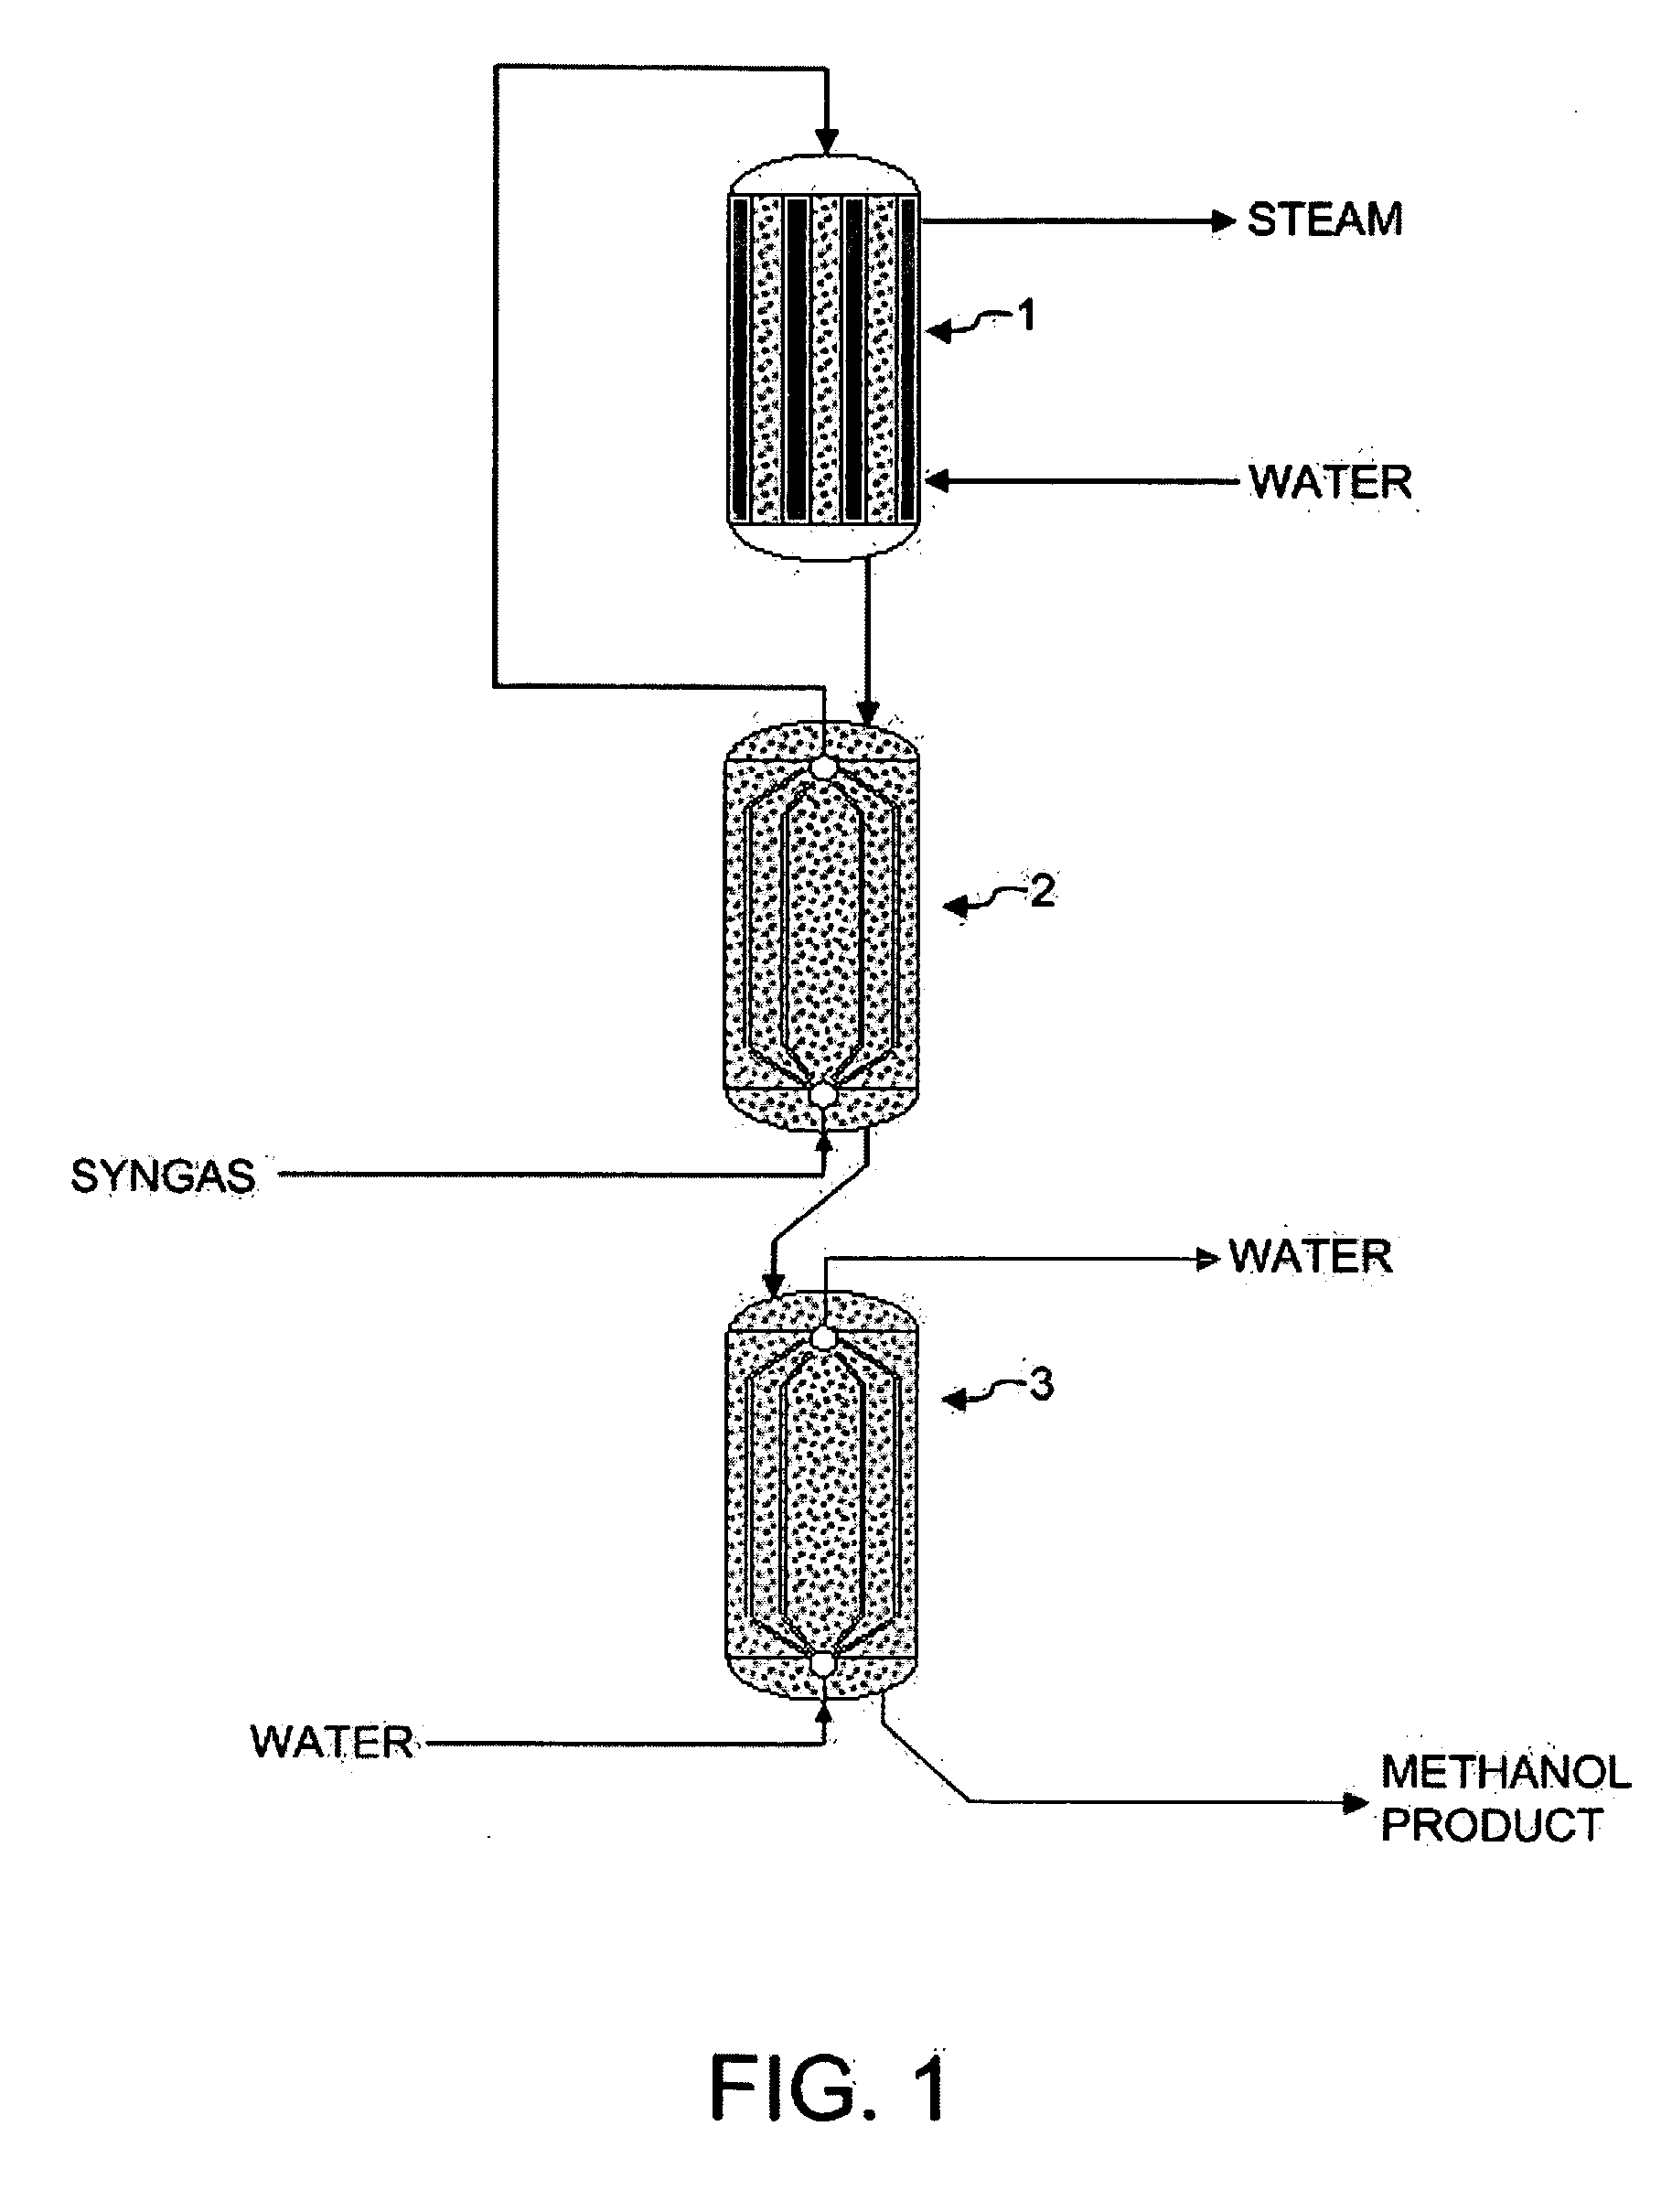 Methanol synthesis and reaction system